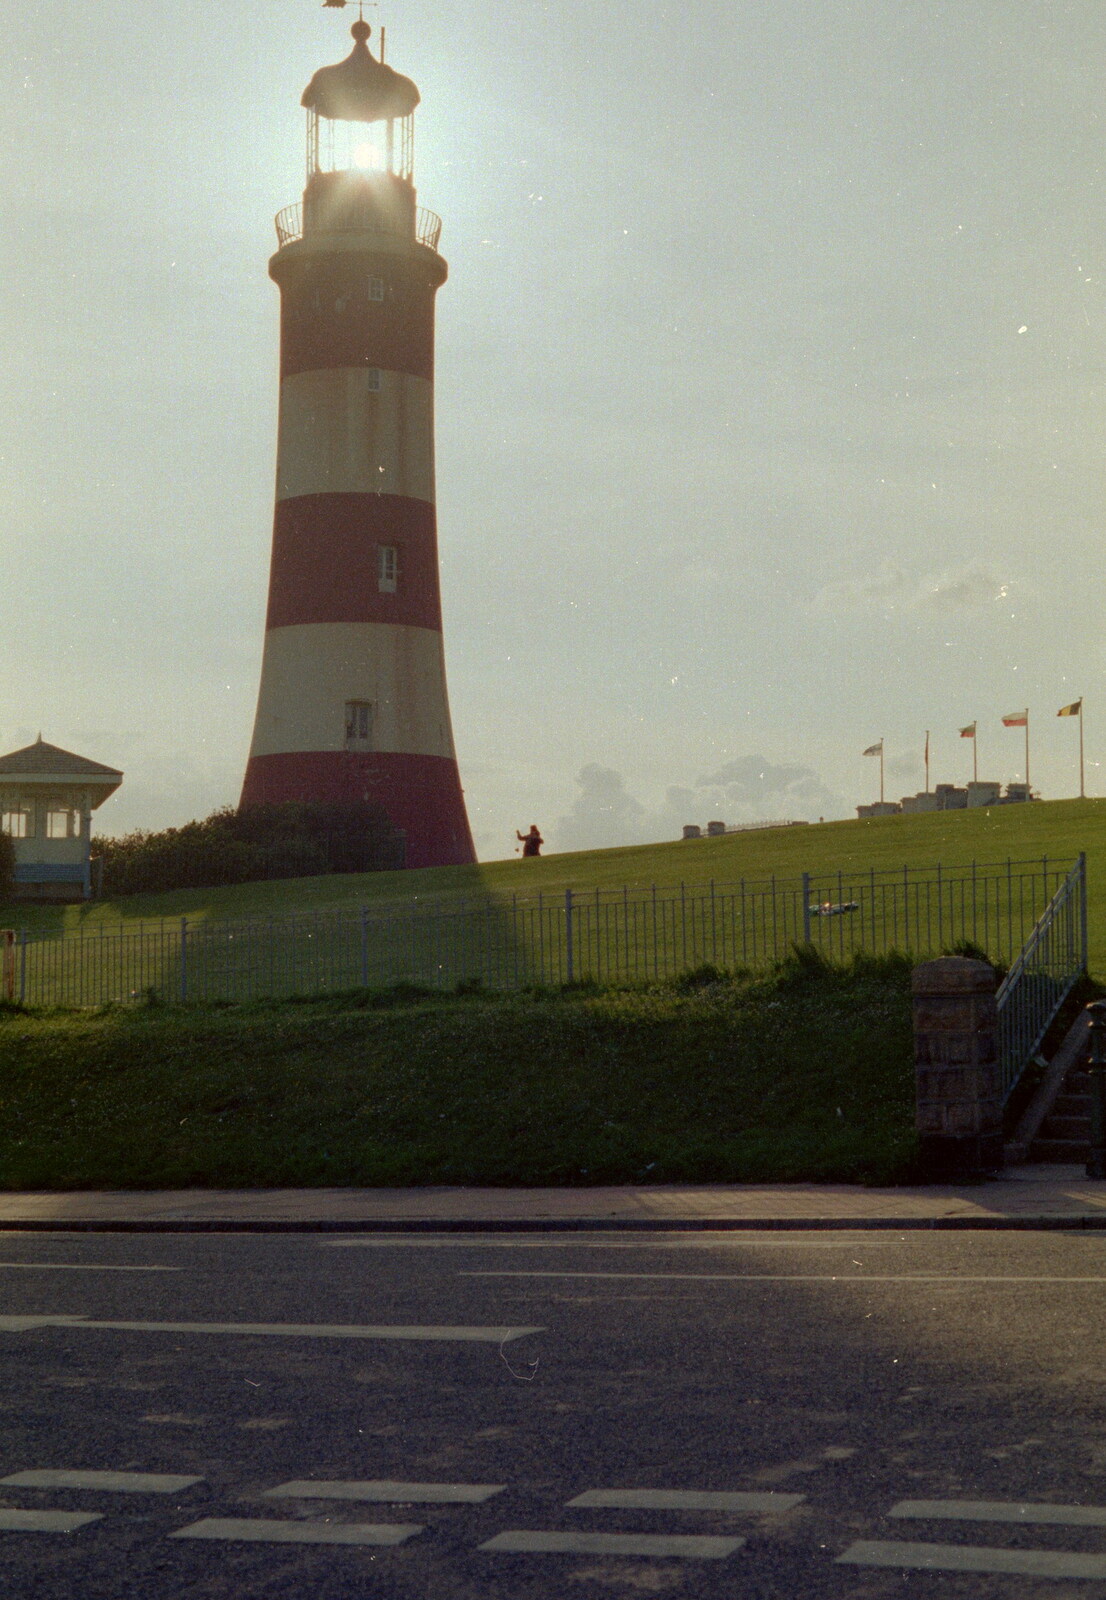 Sun through the lantern room of Smeaton's Tower from Uni: Scenes of Plymouth and the PPSU Bar, Plymouth Polytechnic, Devon - 28th April 1986